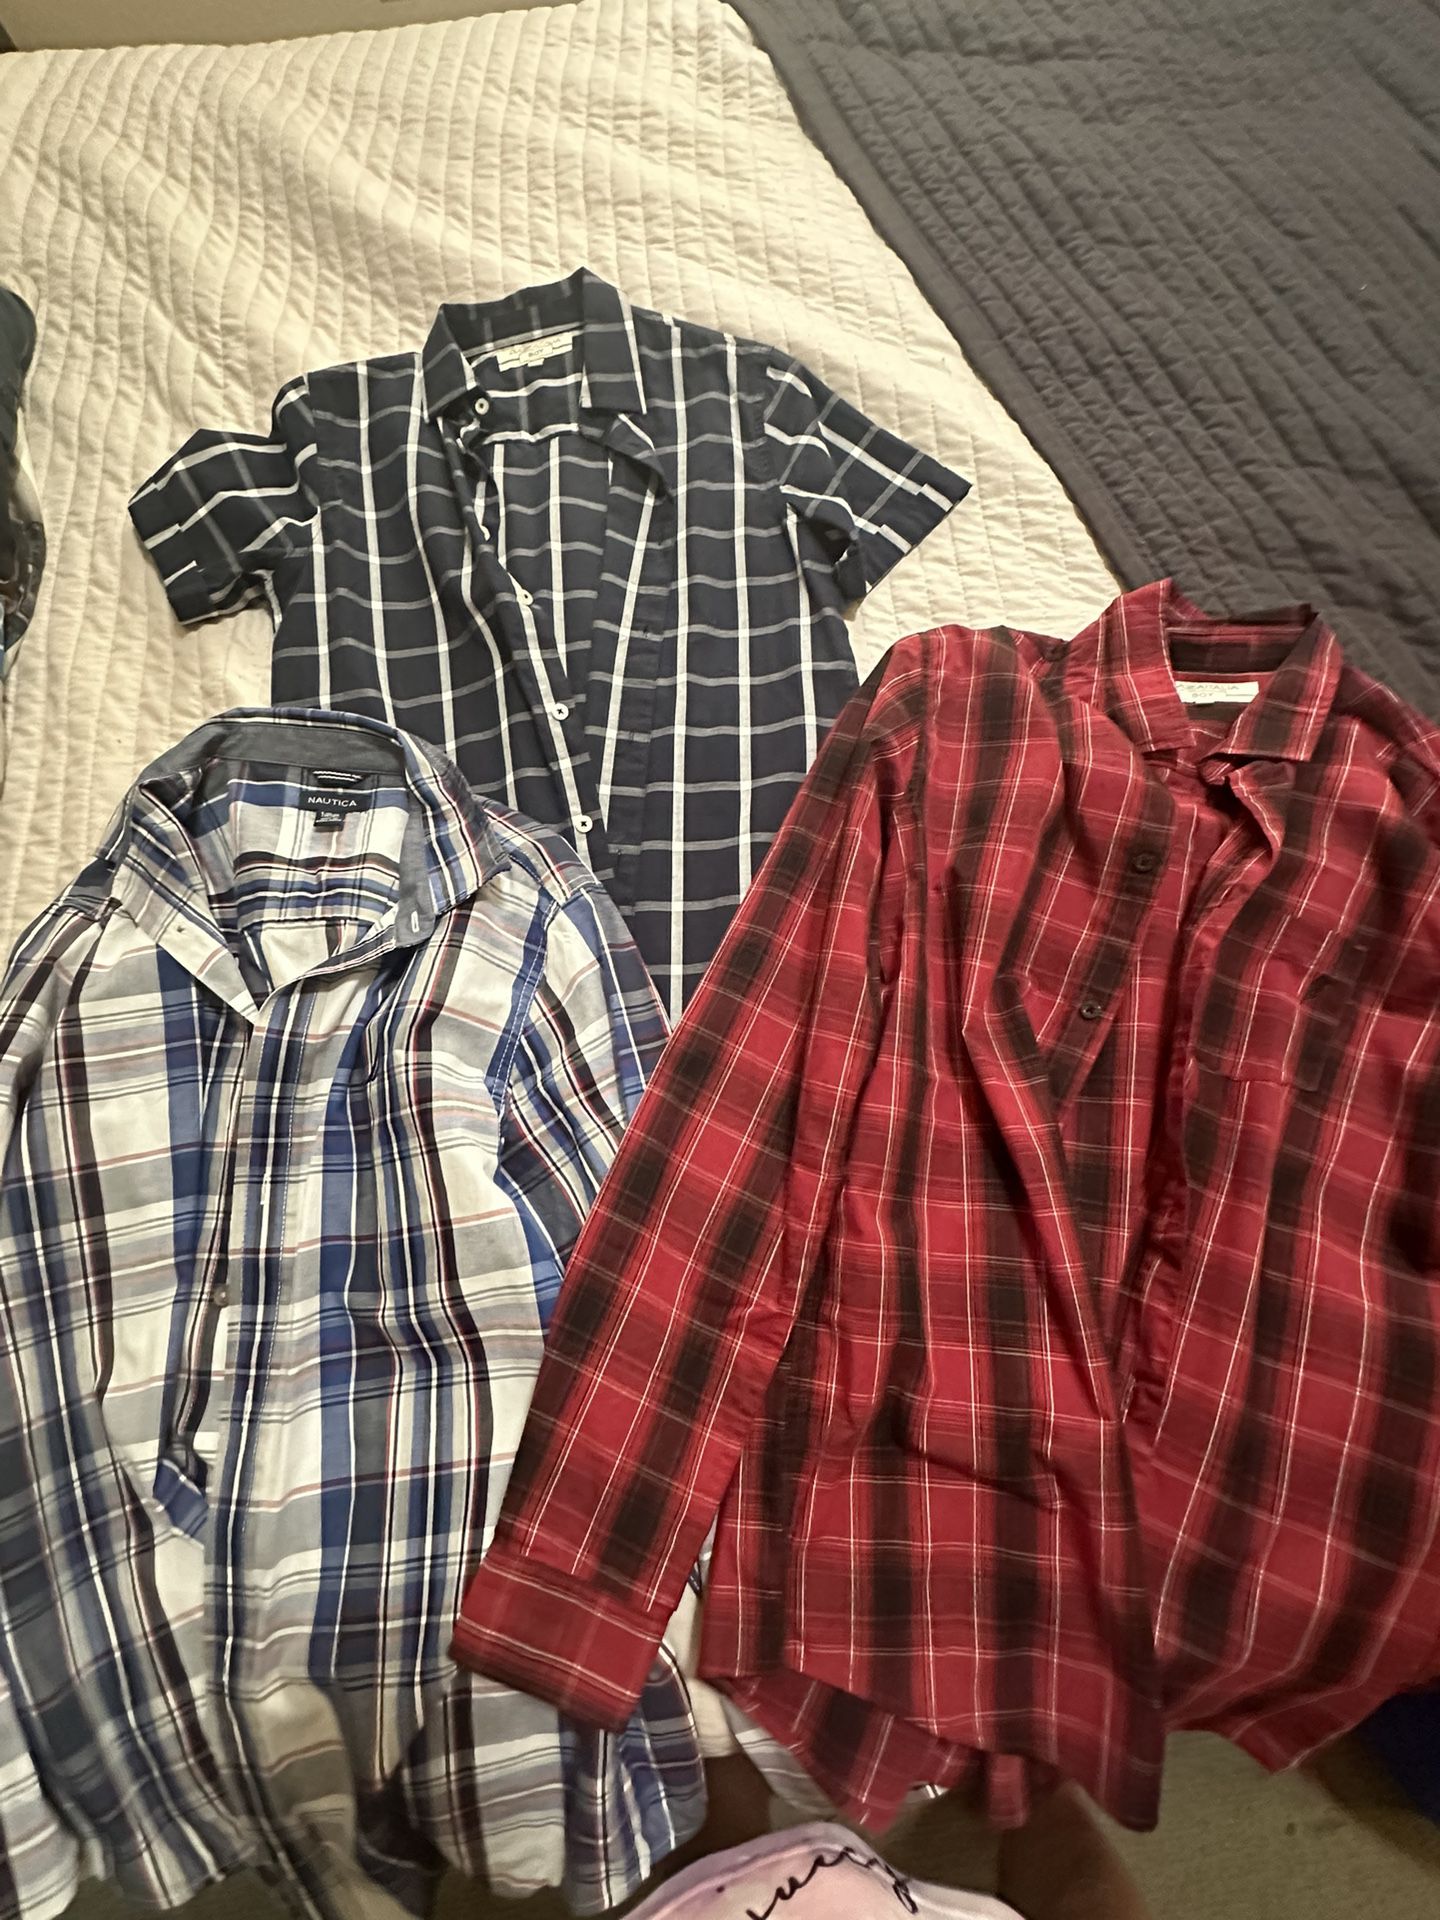 3 Dressing Shirts For Boy Size L 13/14 Yrs New - No Tags 